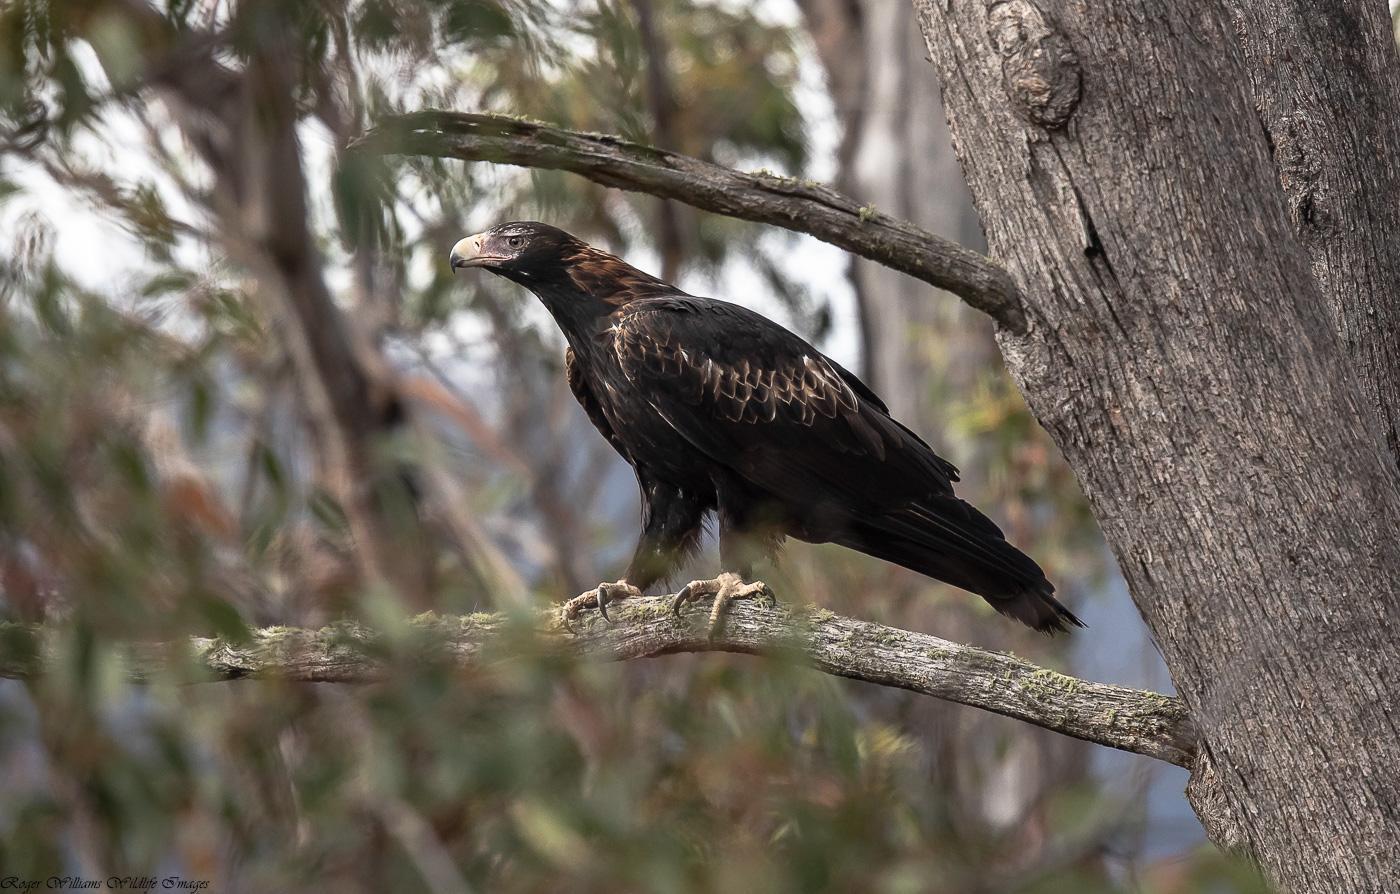 Wedge-tailed Eagle Photo by Roger Williams